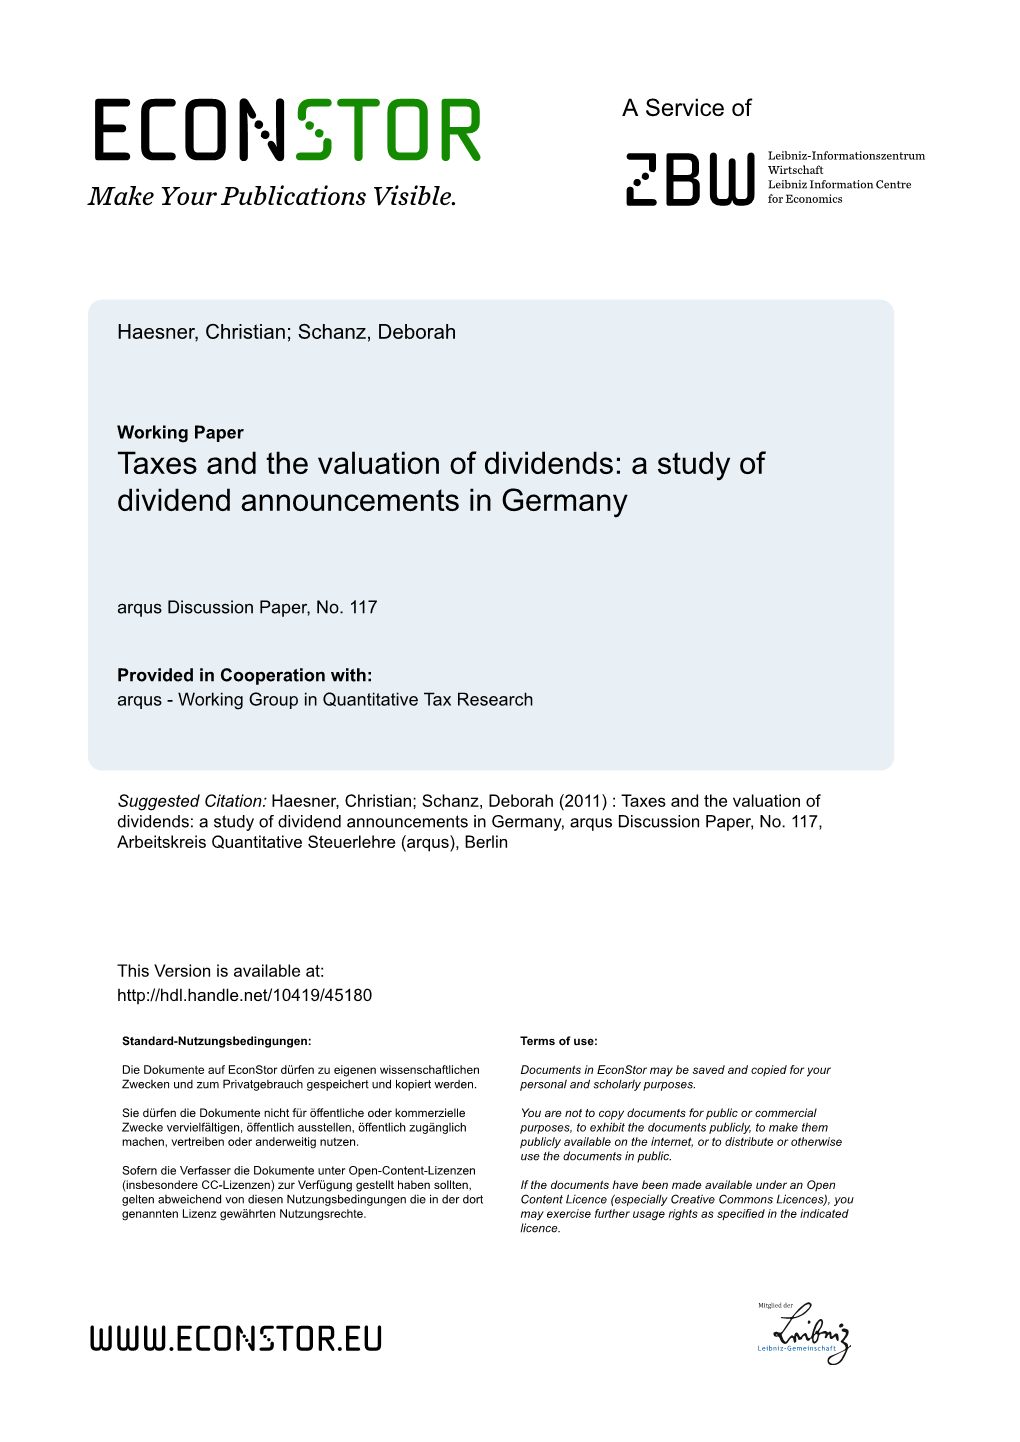 Taxes and the Valuation of Dividends: a Study of Dividend Announcements in Germany